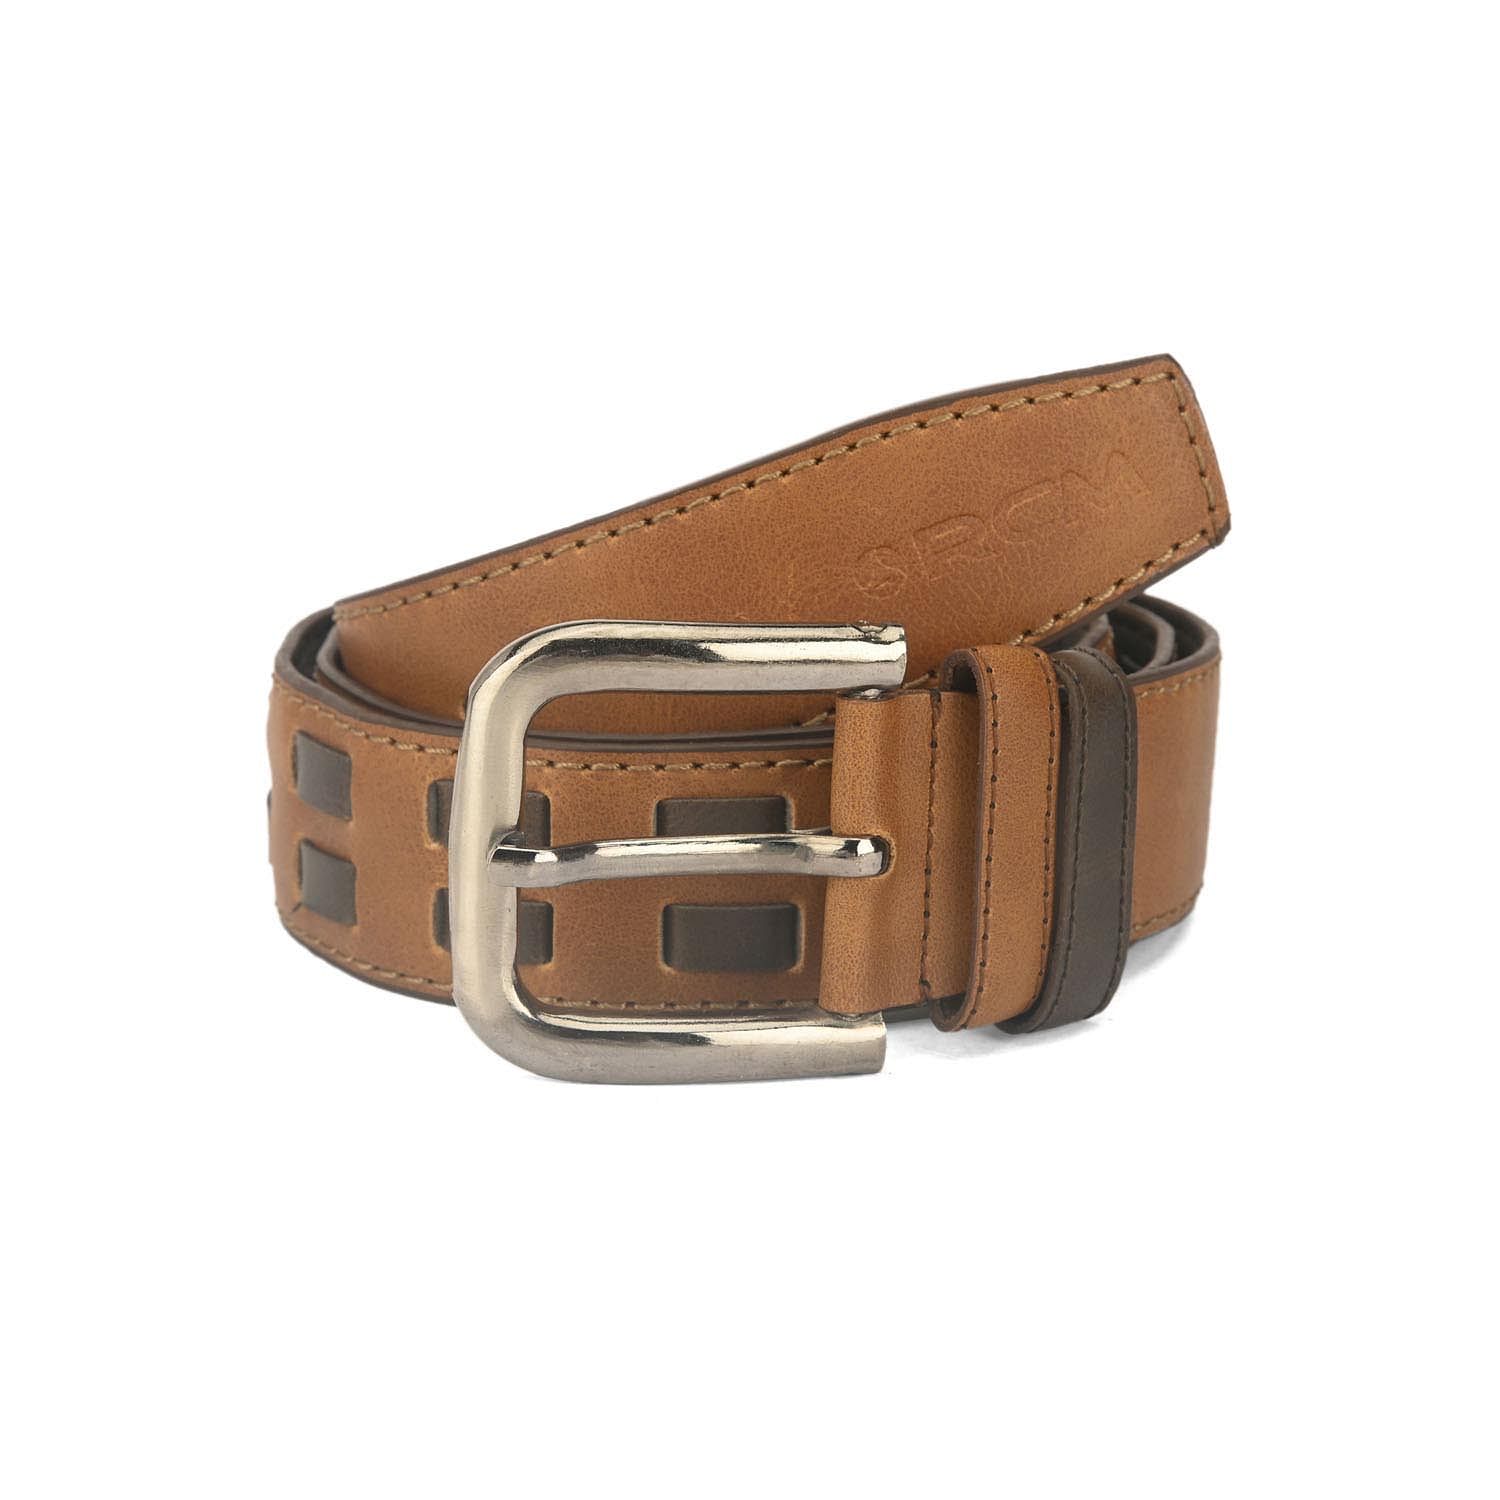 Men's Casual Textured Perforated Belt Tan - LZ-CB-102